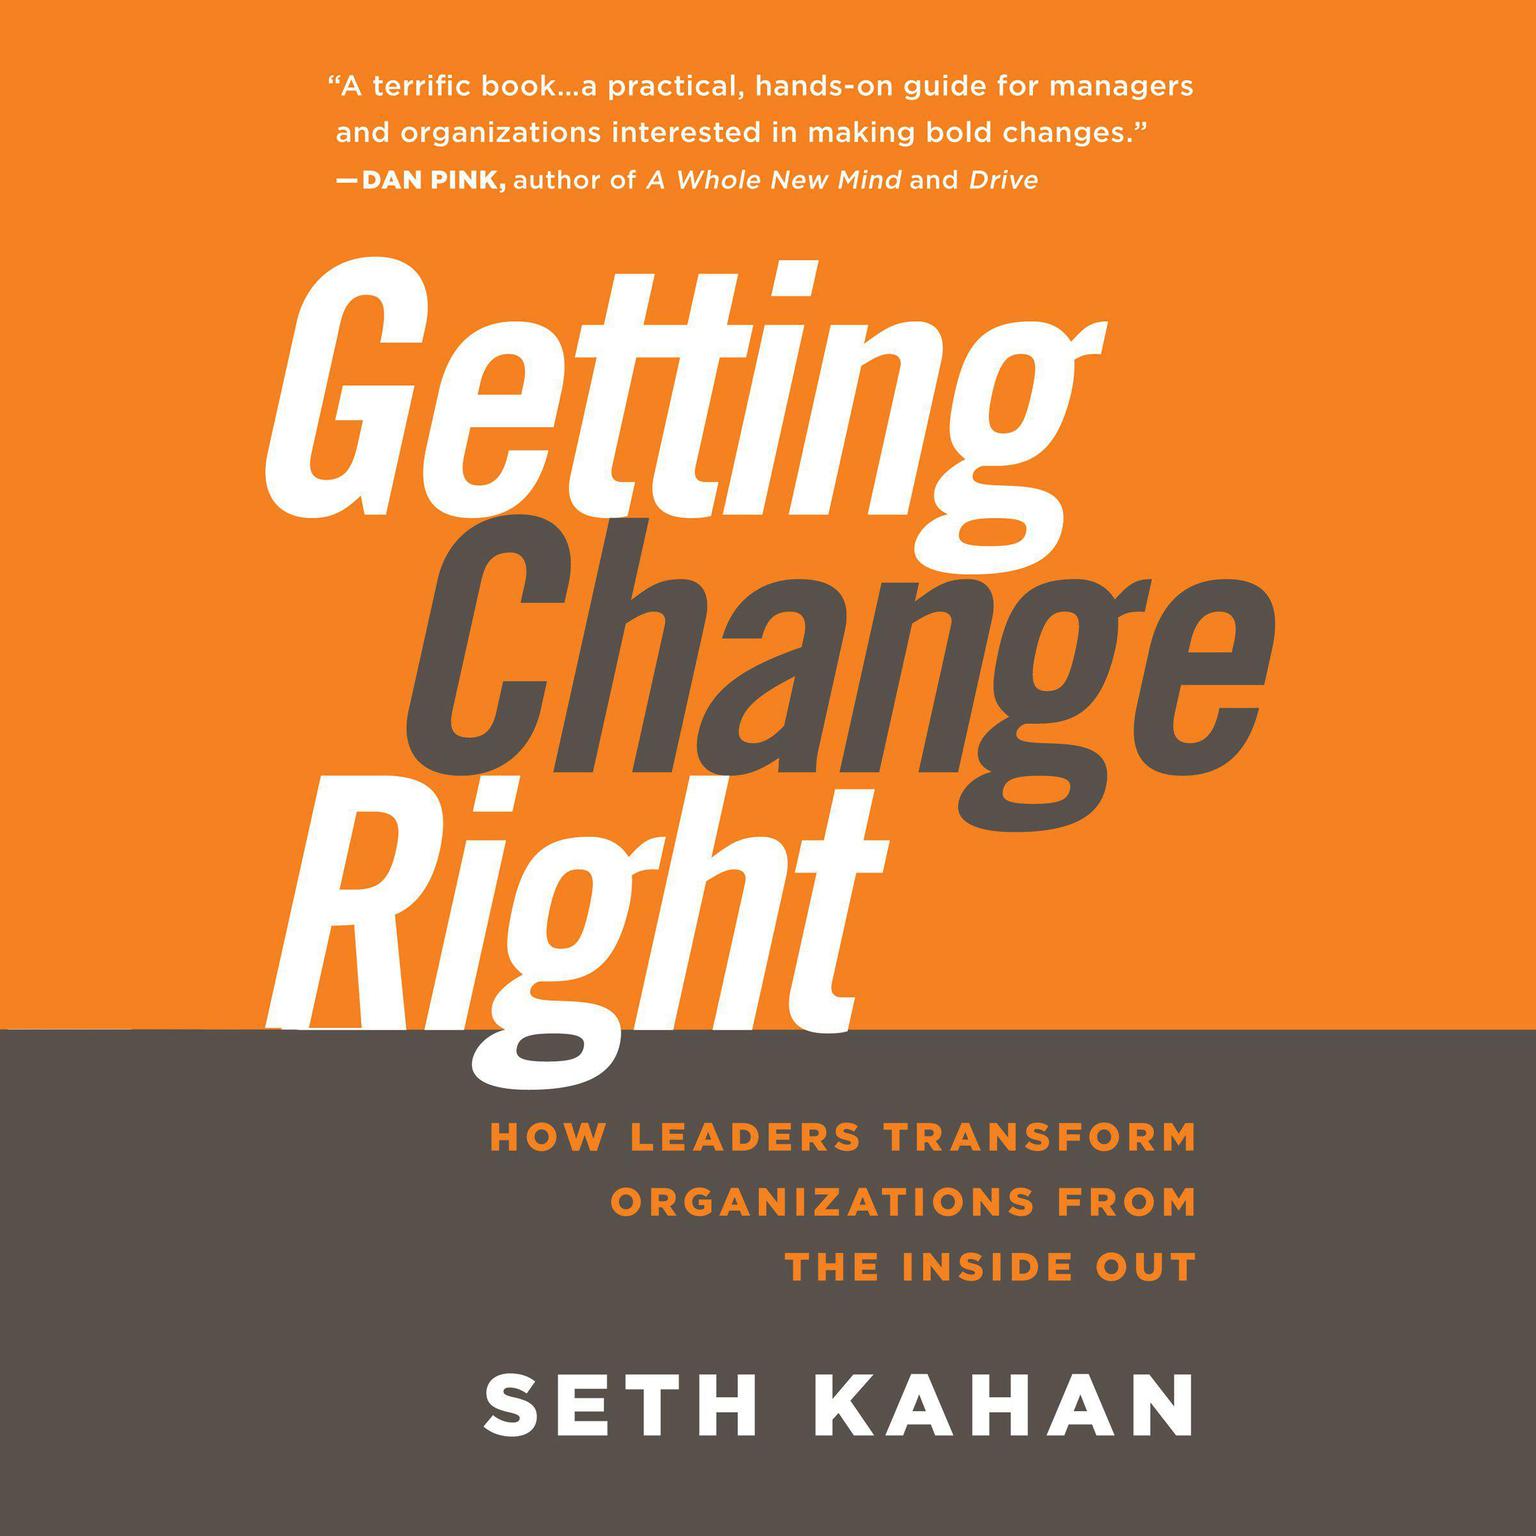 Getting Change Right: How Leaders Transform Organizations from the Inside Out  Audiobook, by Seth Kahan